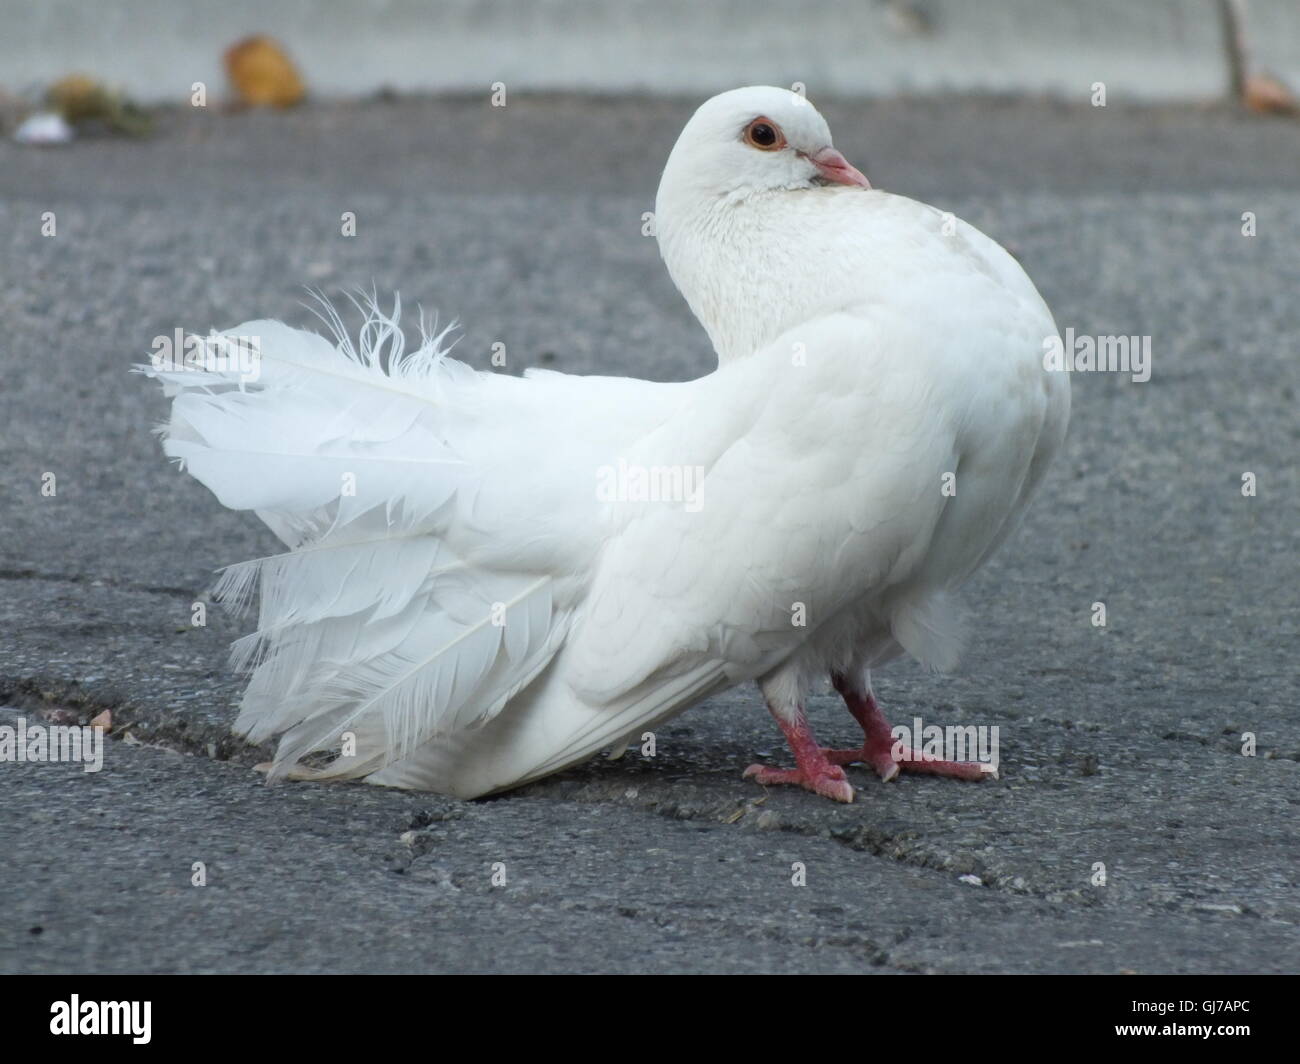 images of white pigeon